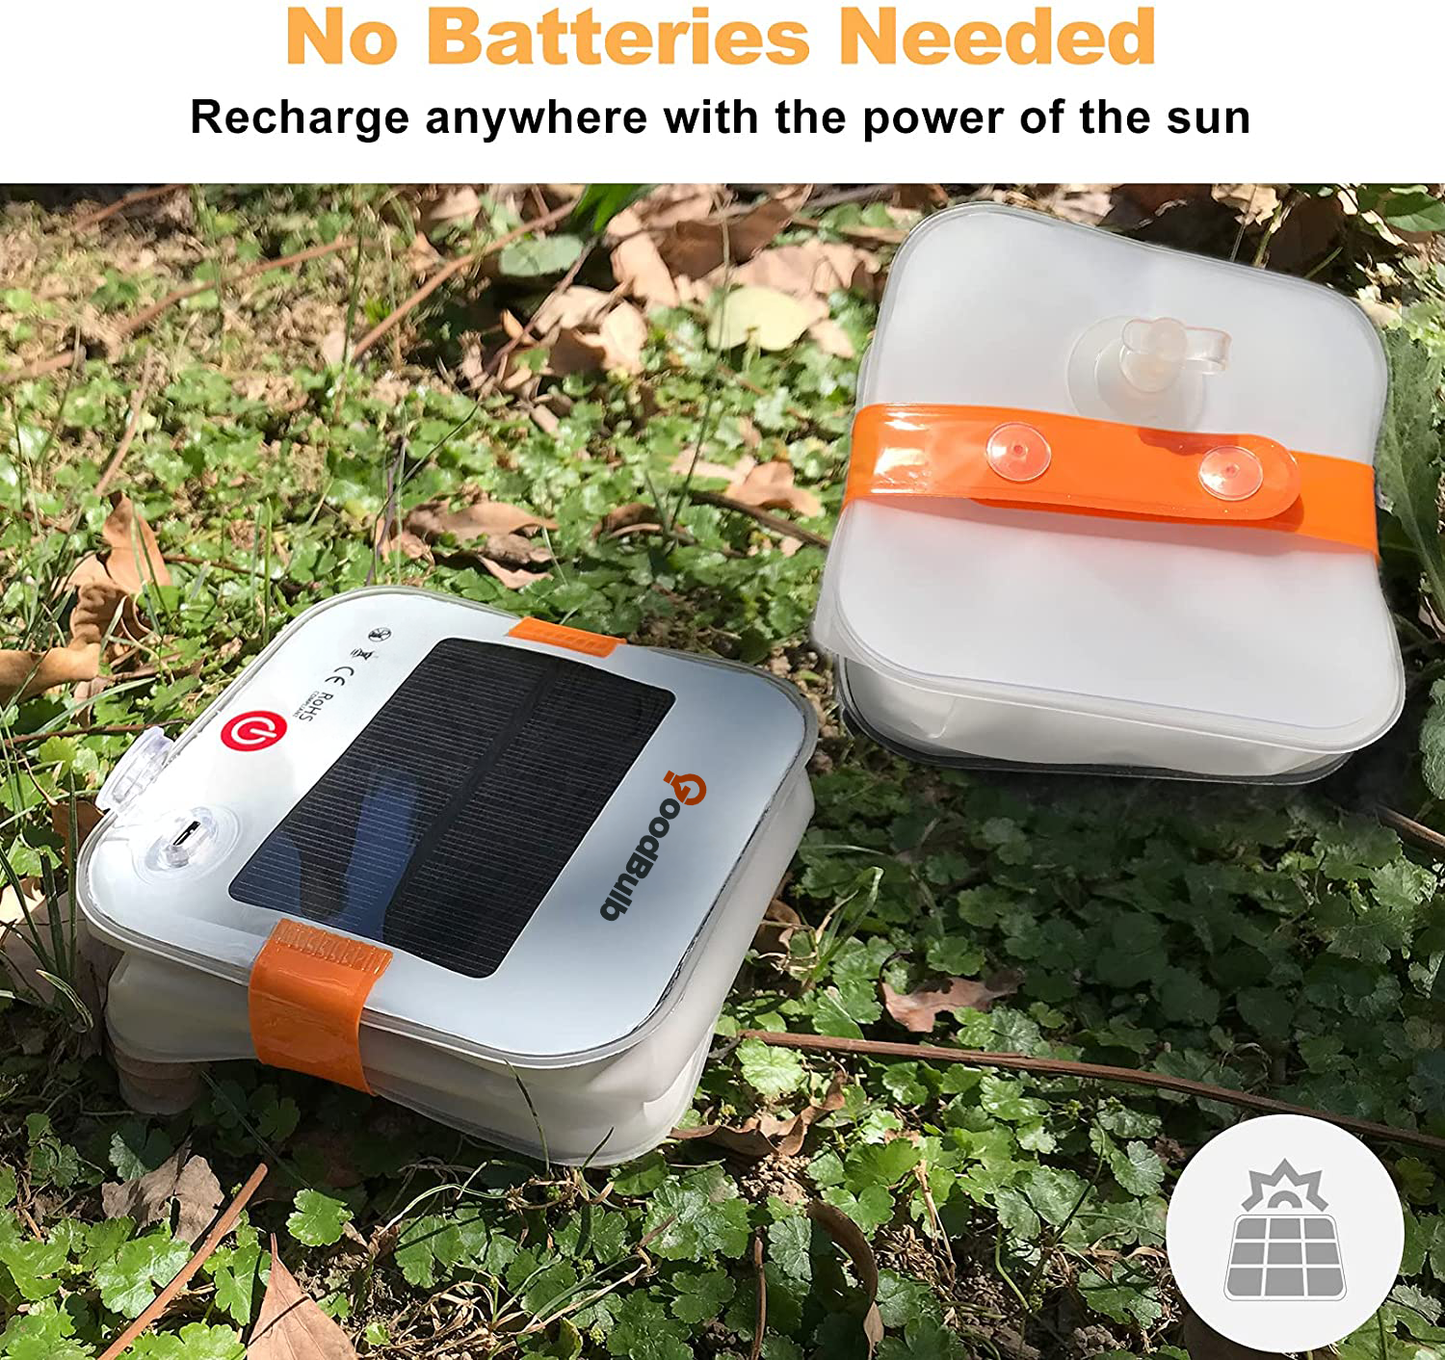 Inflatable Solar portable lantern is able to recharge anywhere with the power of the sun, no batteries needed.